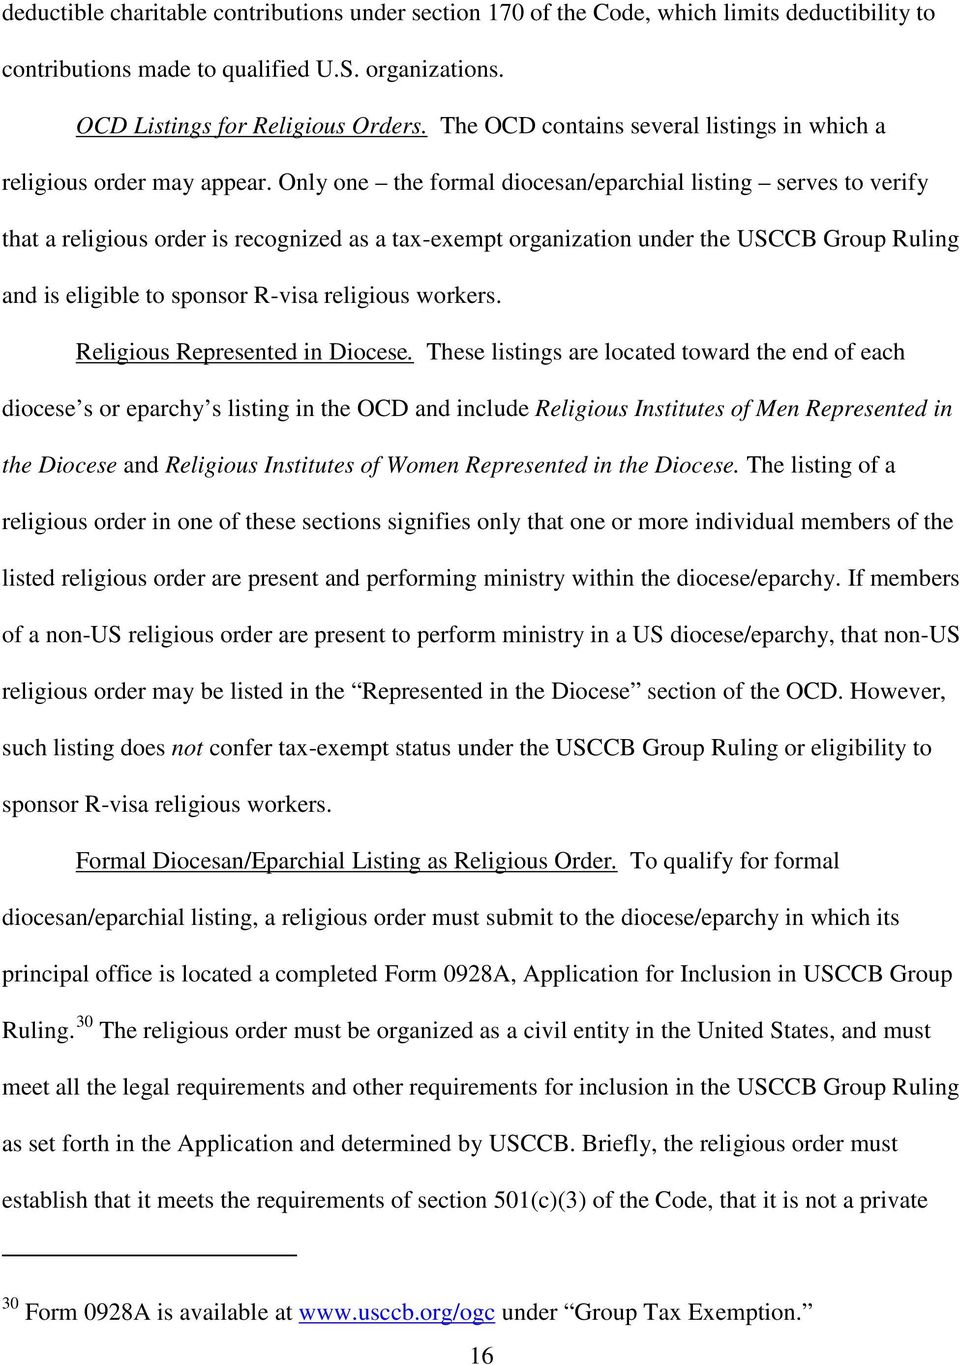 Only one the formal diocesan/eparchial listing serves to verify that a religious order is recognized as a tax-exempt organization under the USCCB Group Ruling and is eligible to sponsor R-visa